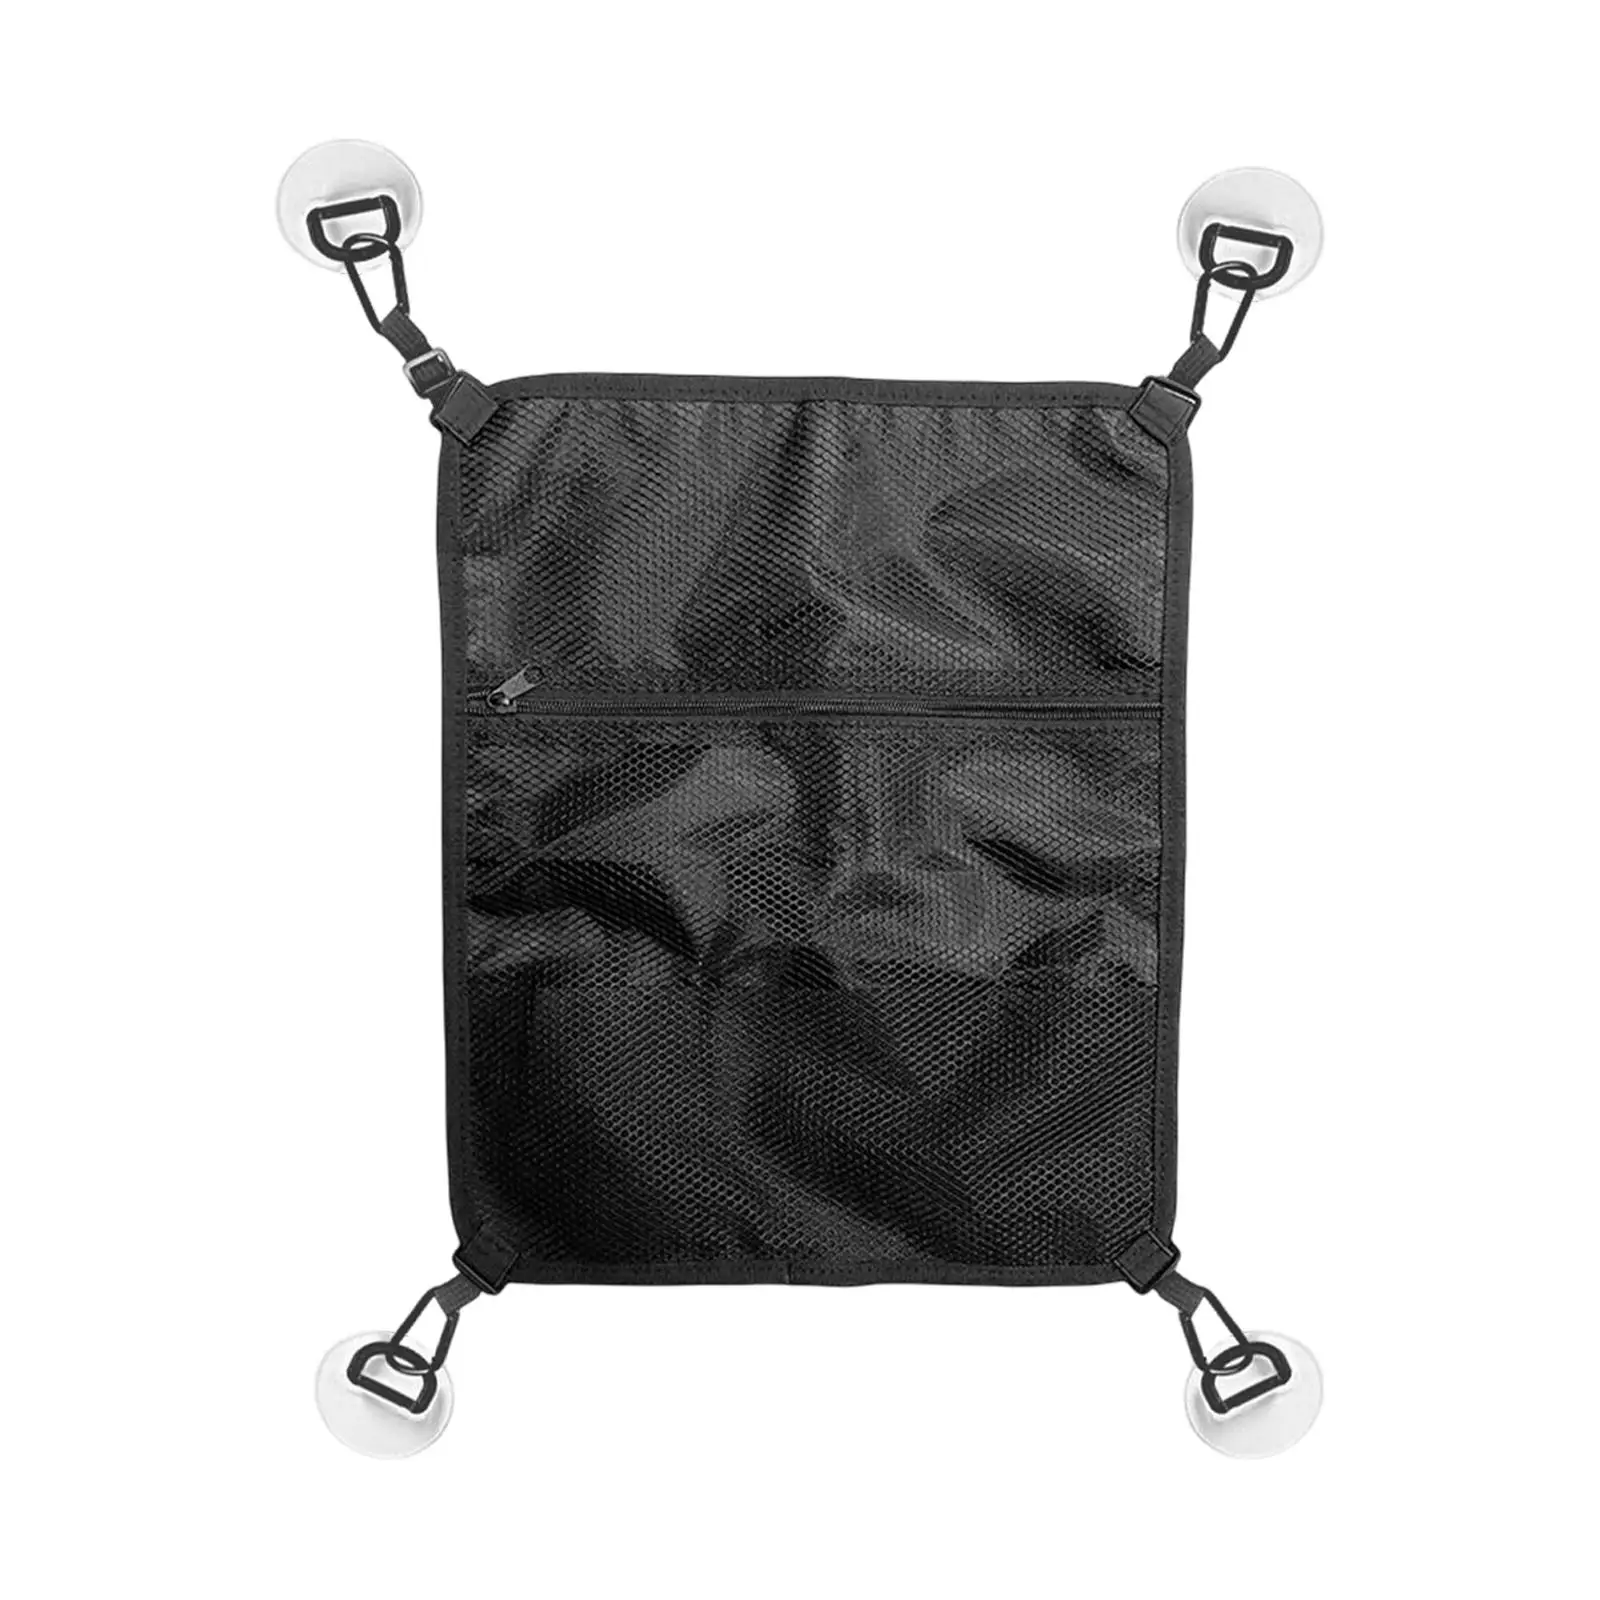 Surfboard Storage Mesh Bag, Stand Up Paddle Board Surfing Deck Attachment Net